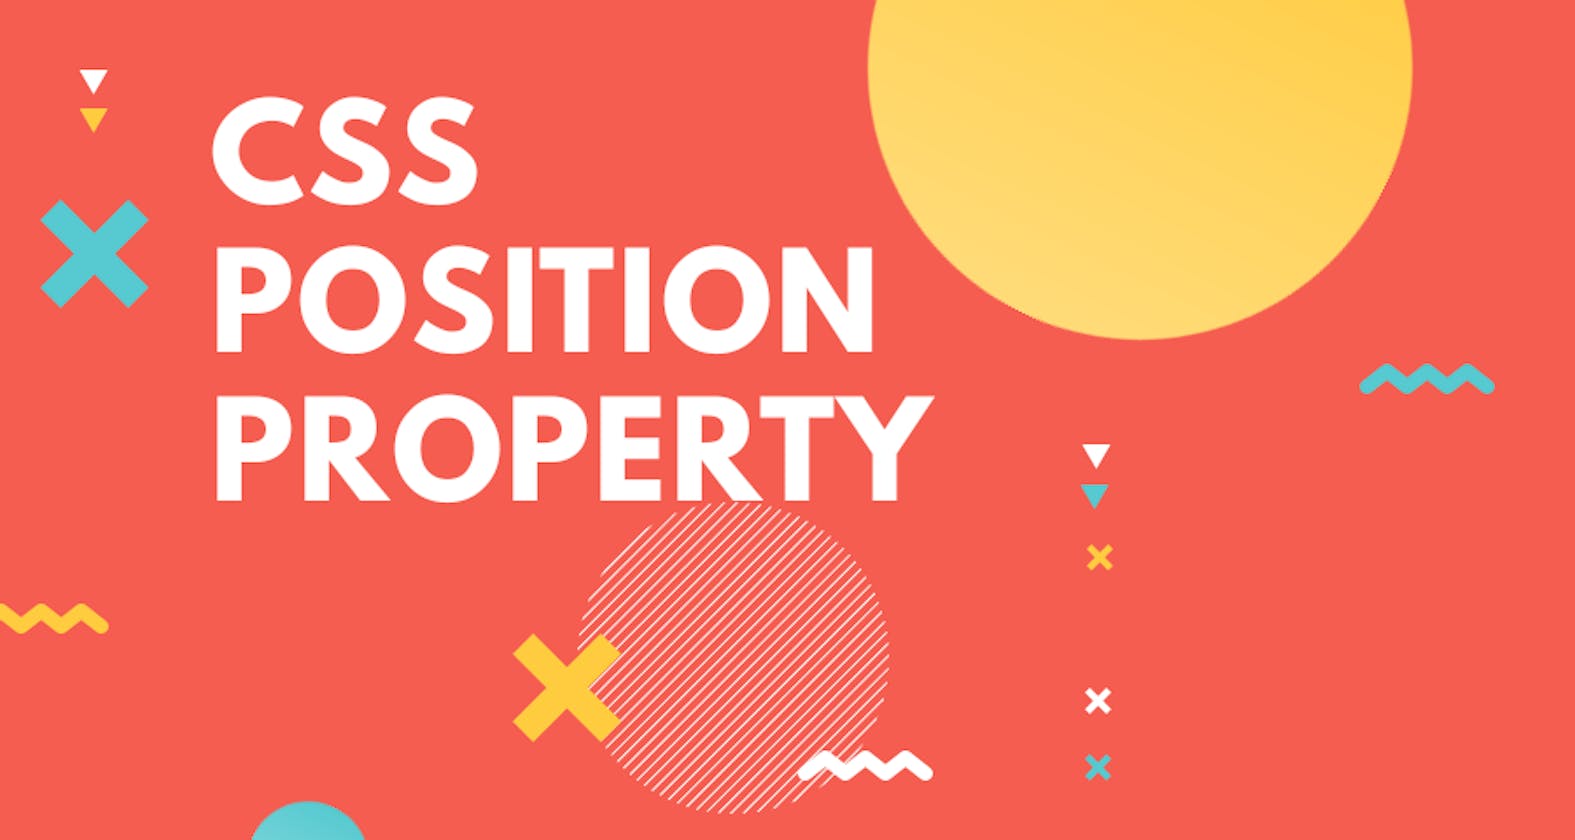 Understanding The Css Position Property